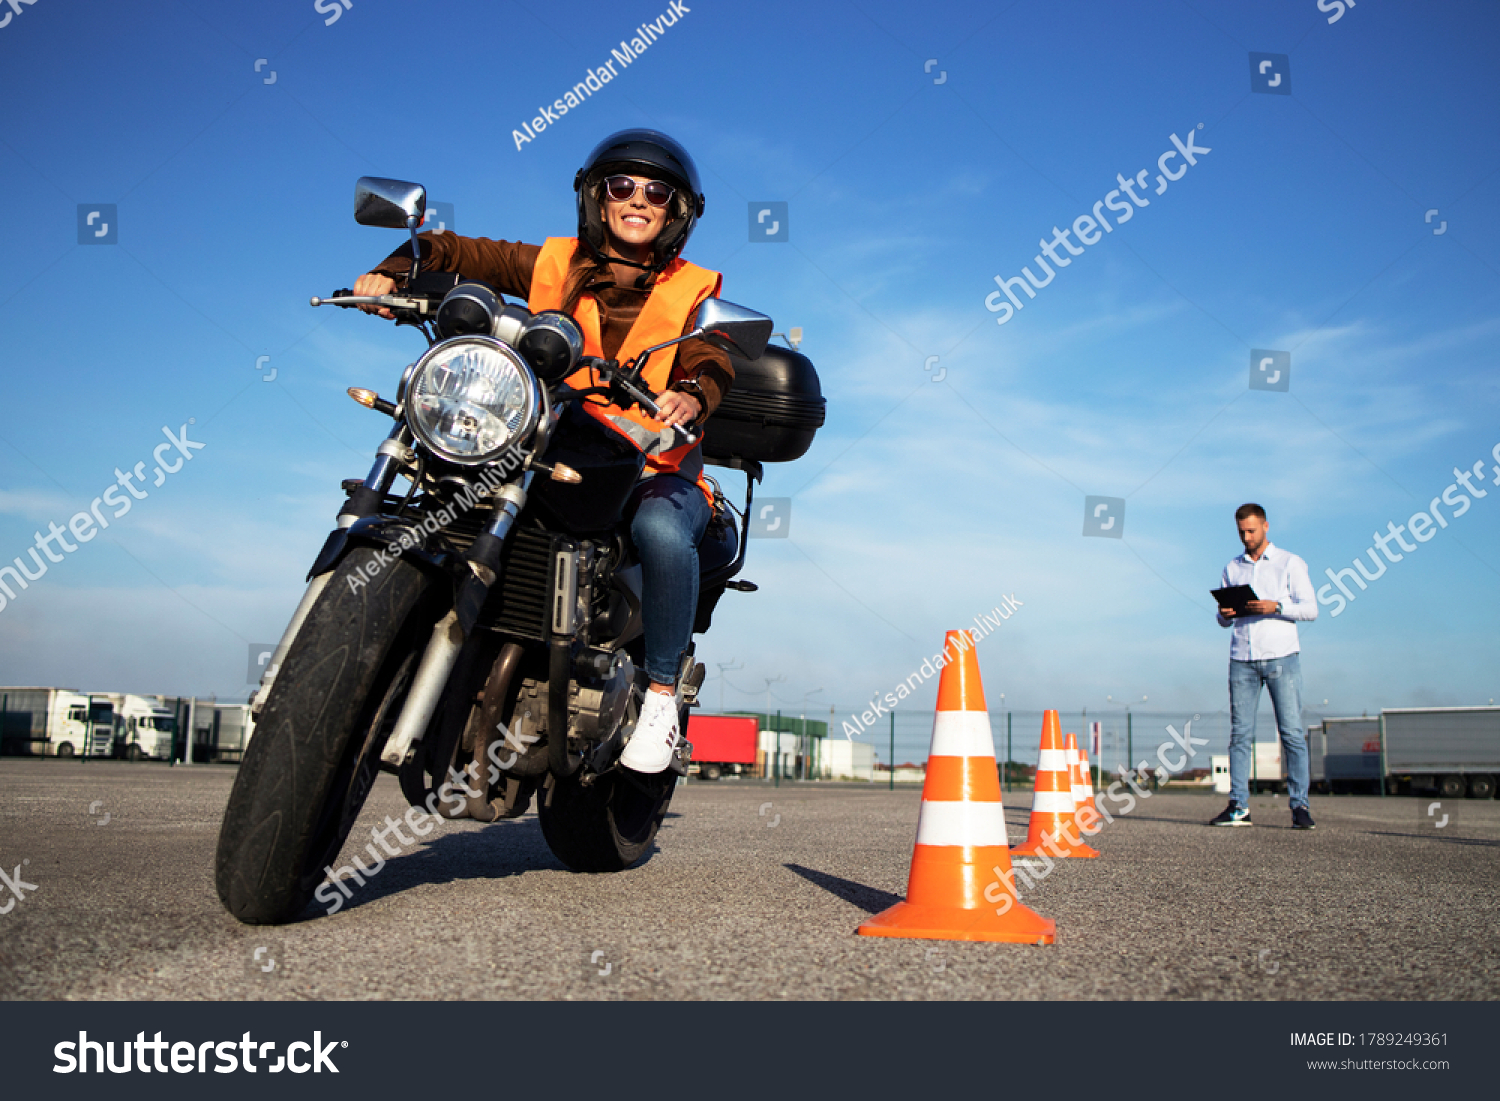 Motorcycle school of driving. Female driver with helmet taking motorcycle lessons and practicing ride. In background traffic cones and instructor with checklist rating and evaluating the ride.  #1789249361